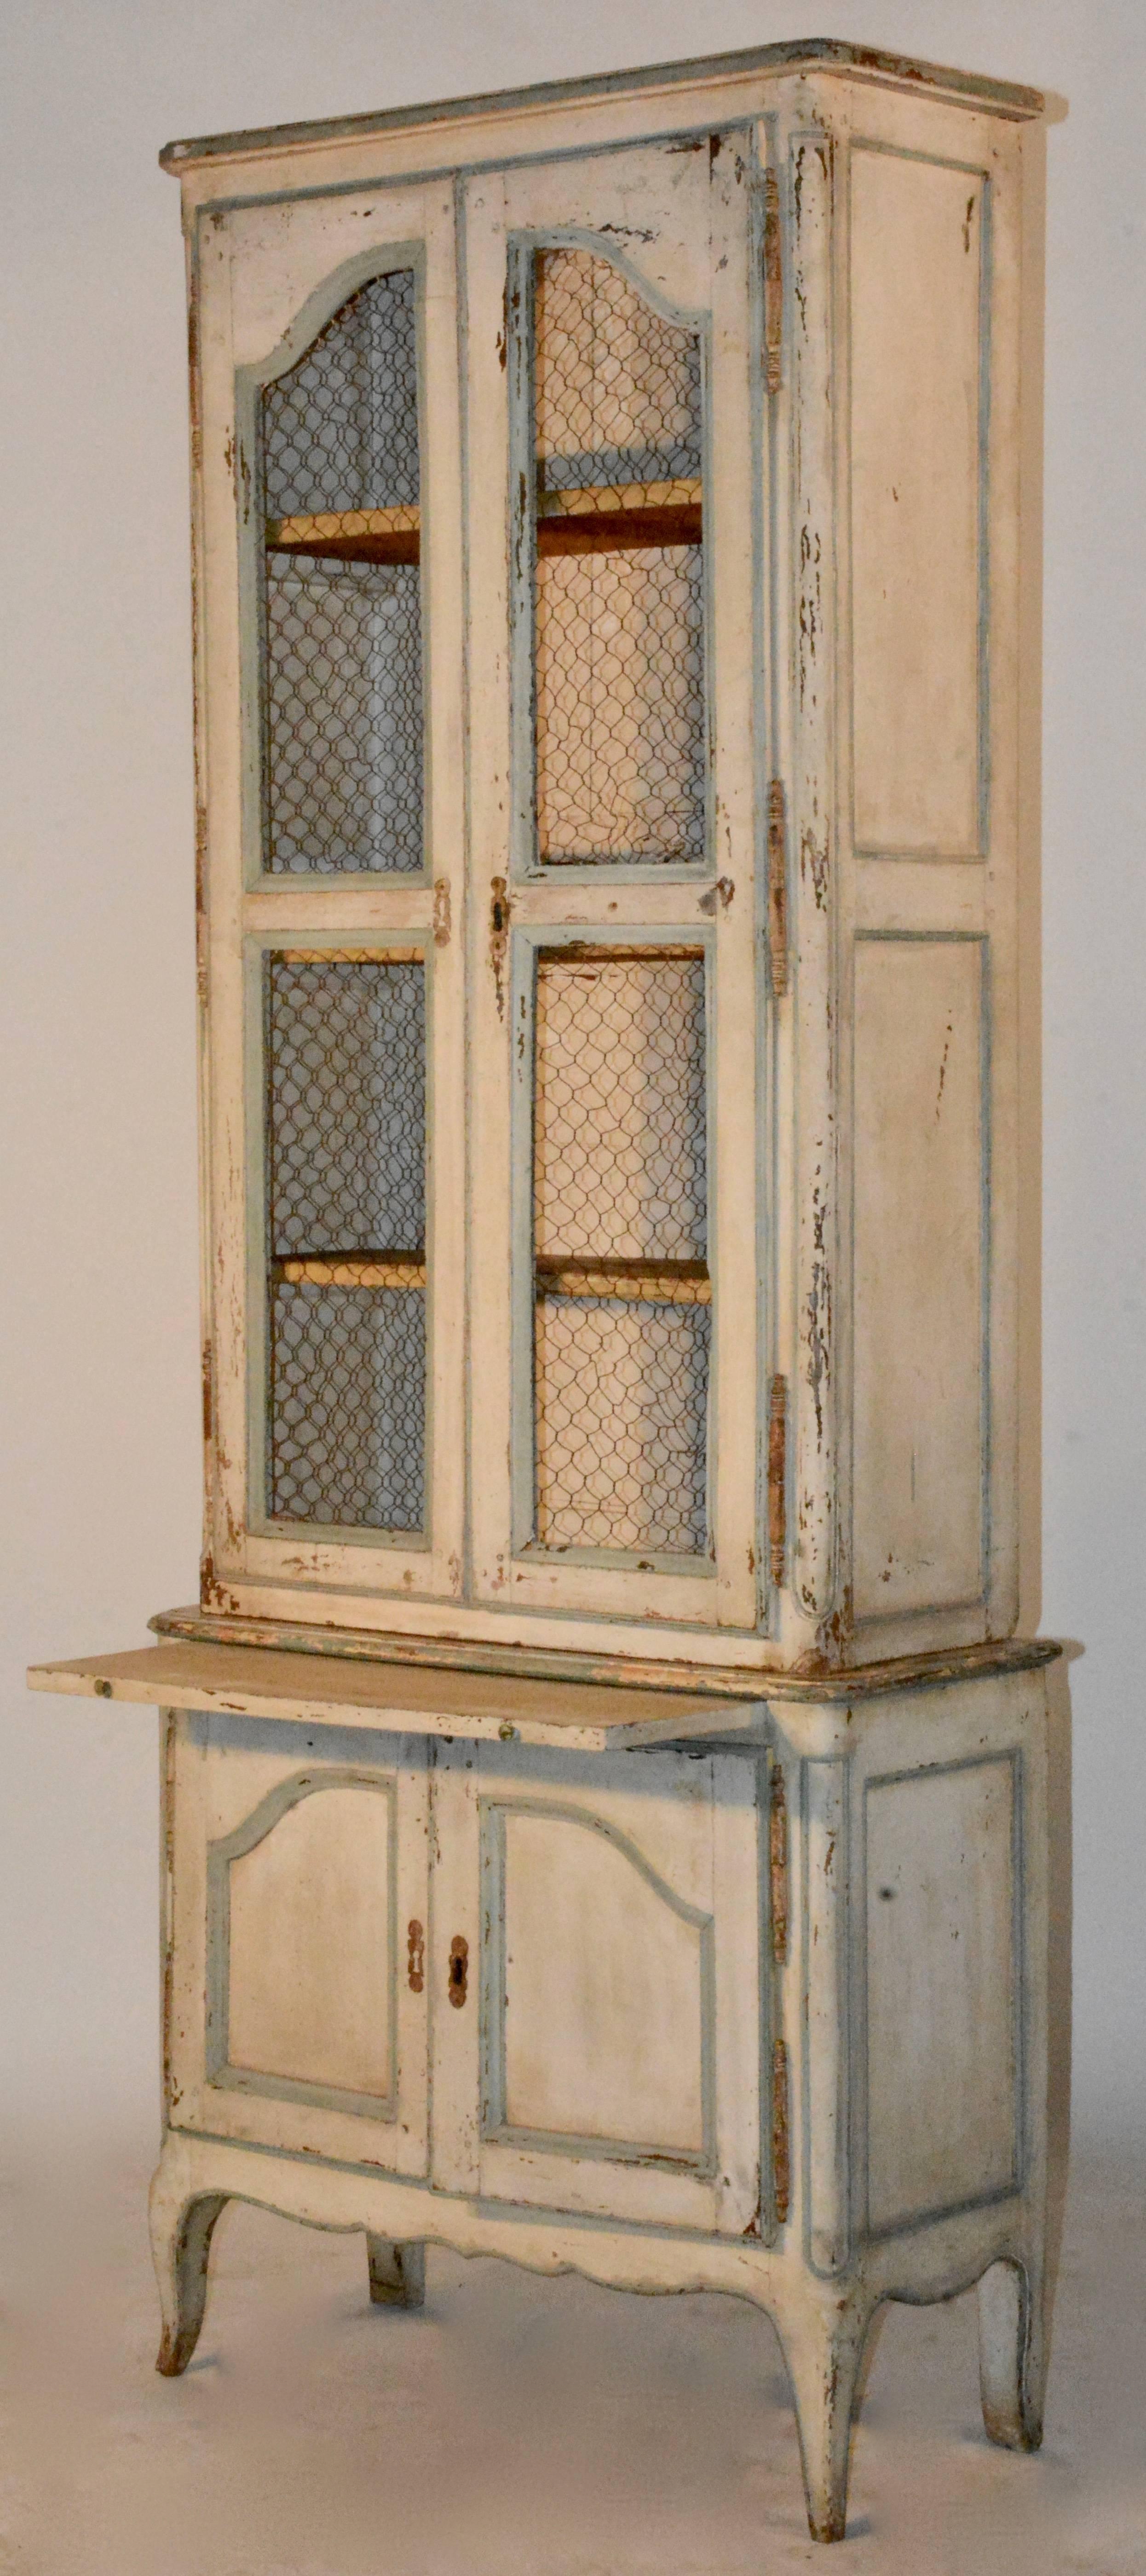 This two-piece cupboard features the original paint and wire front. Has a pull-out board. Original lock mechanisms and key. It boasts a beautiful soft cream color with blue accents. The bottom doors open to add more storage.